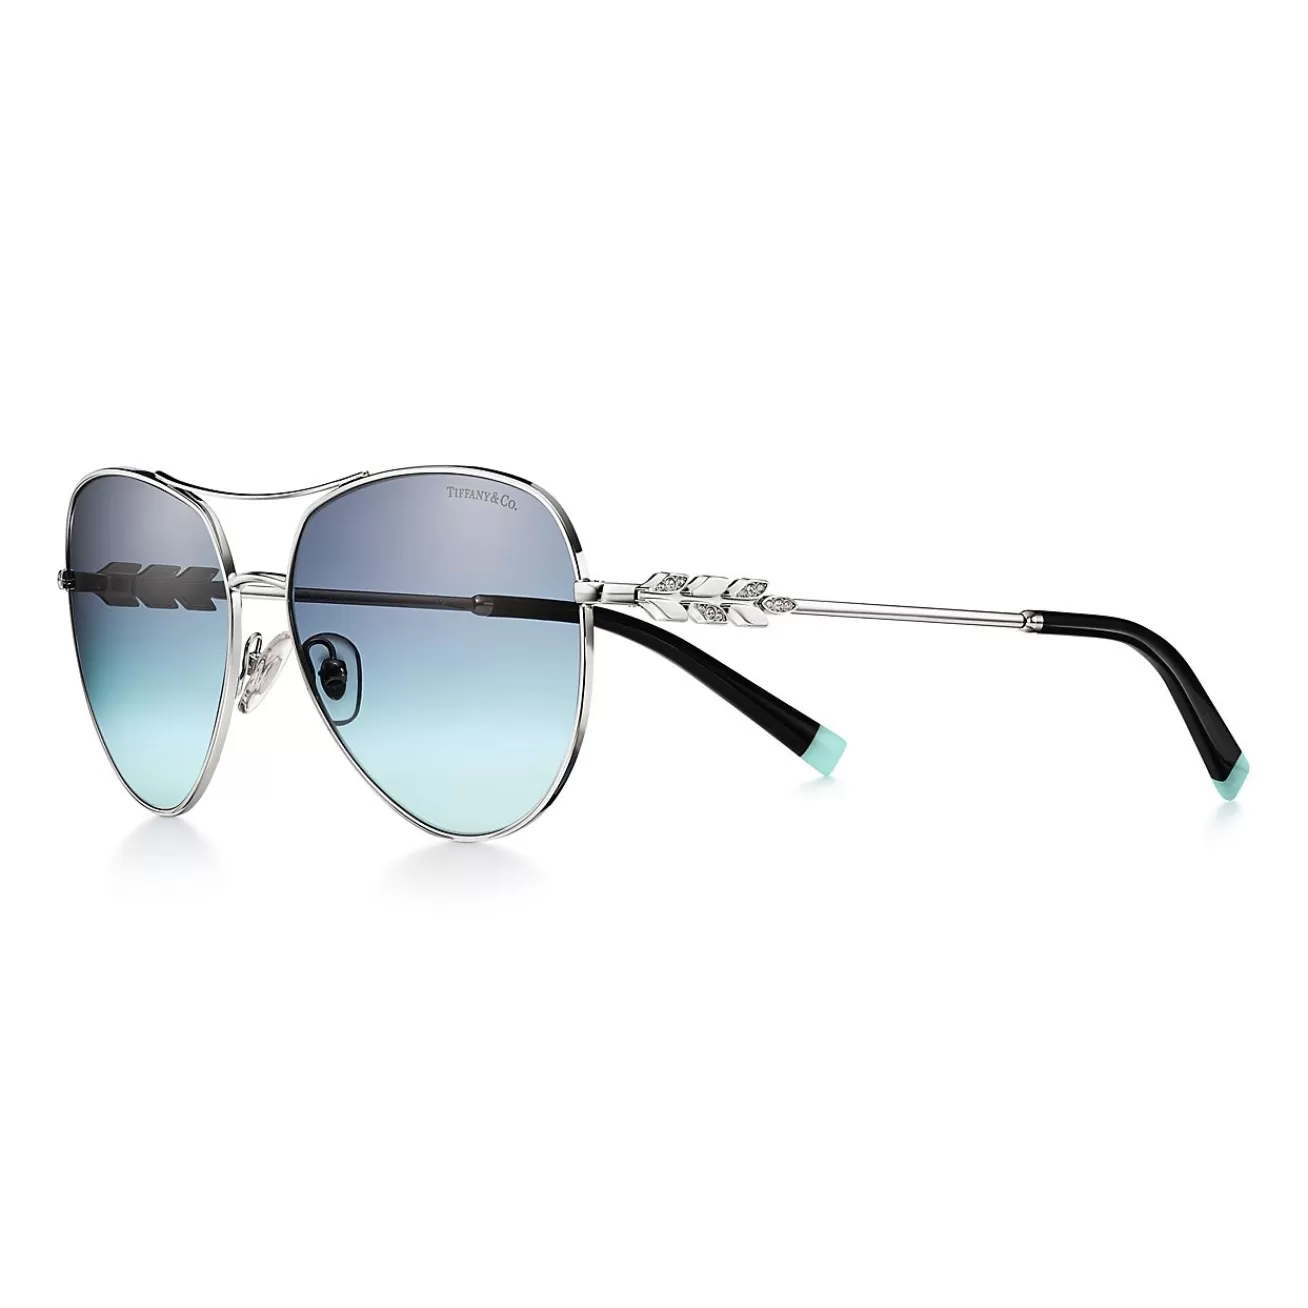 Tiffany & Co. Tiffany Victoria® Sunglasses in Silver-colored Metal with Gradient Blue Lenses | ^ Tiffany Victoria® | Sunglasses